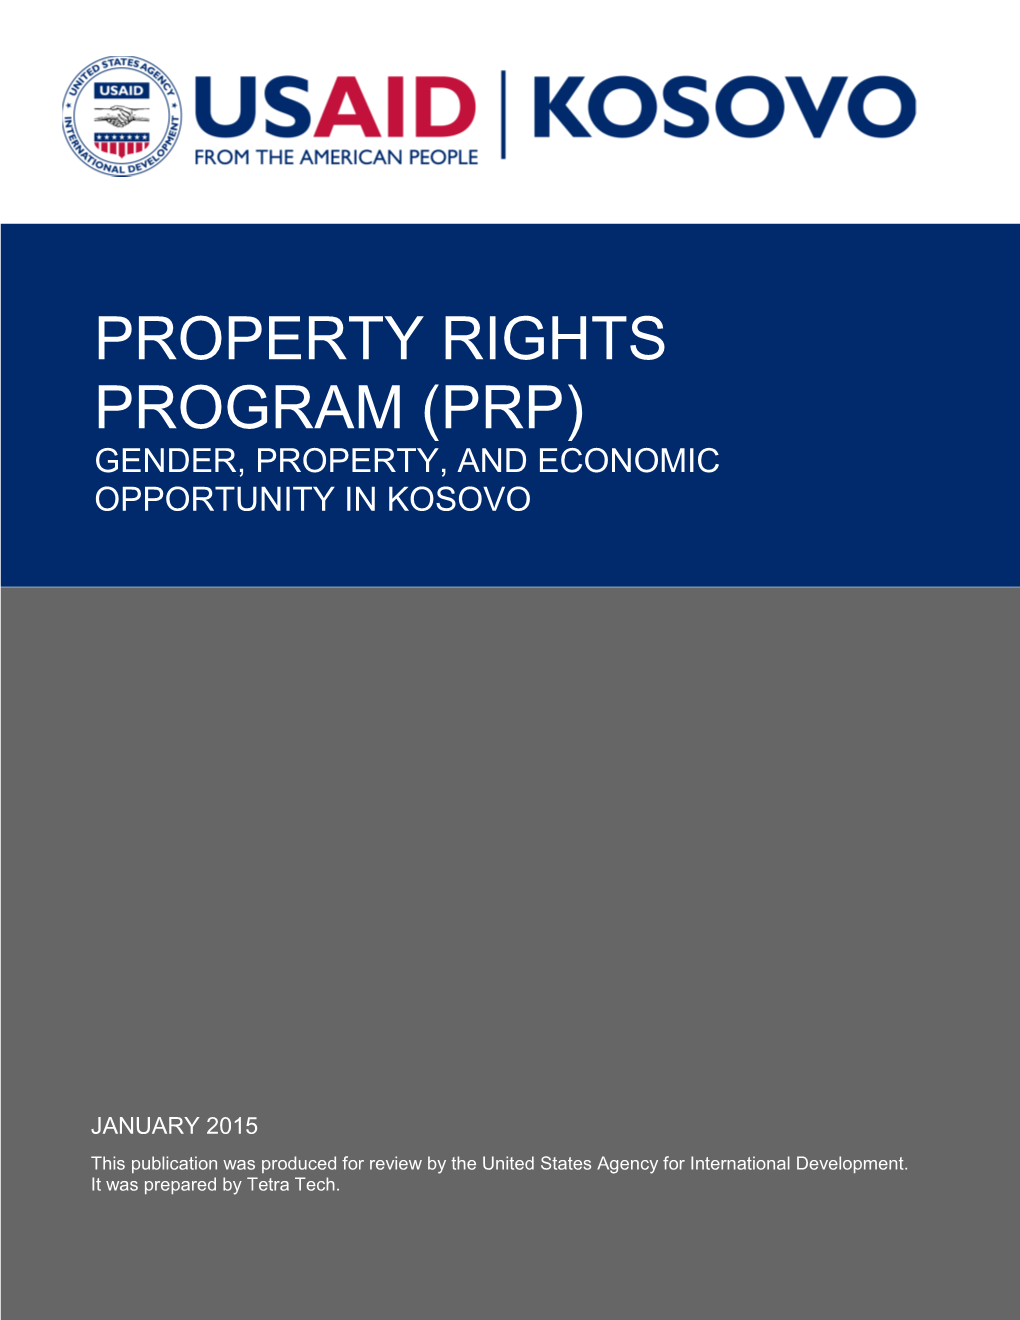 Property Rights Program (Prp) Gender, Property, and Economic Opportunity in Kosovo